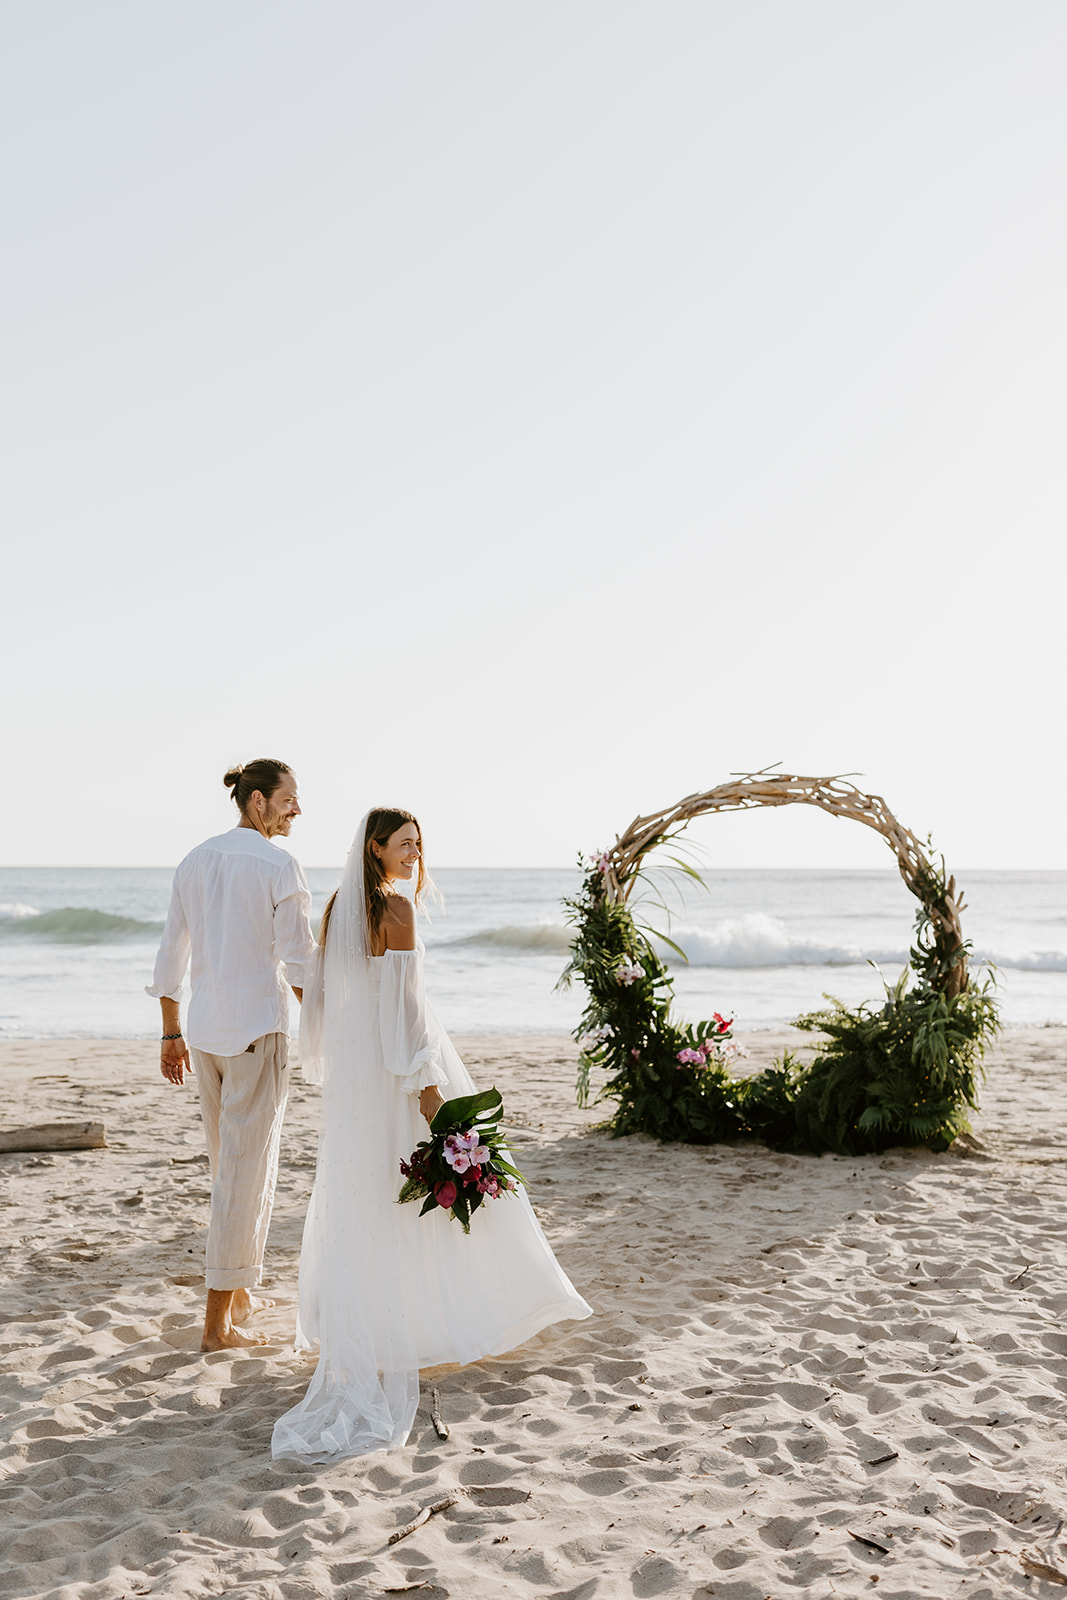 A flower arch on the beach for an elopement in Costa Rica.